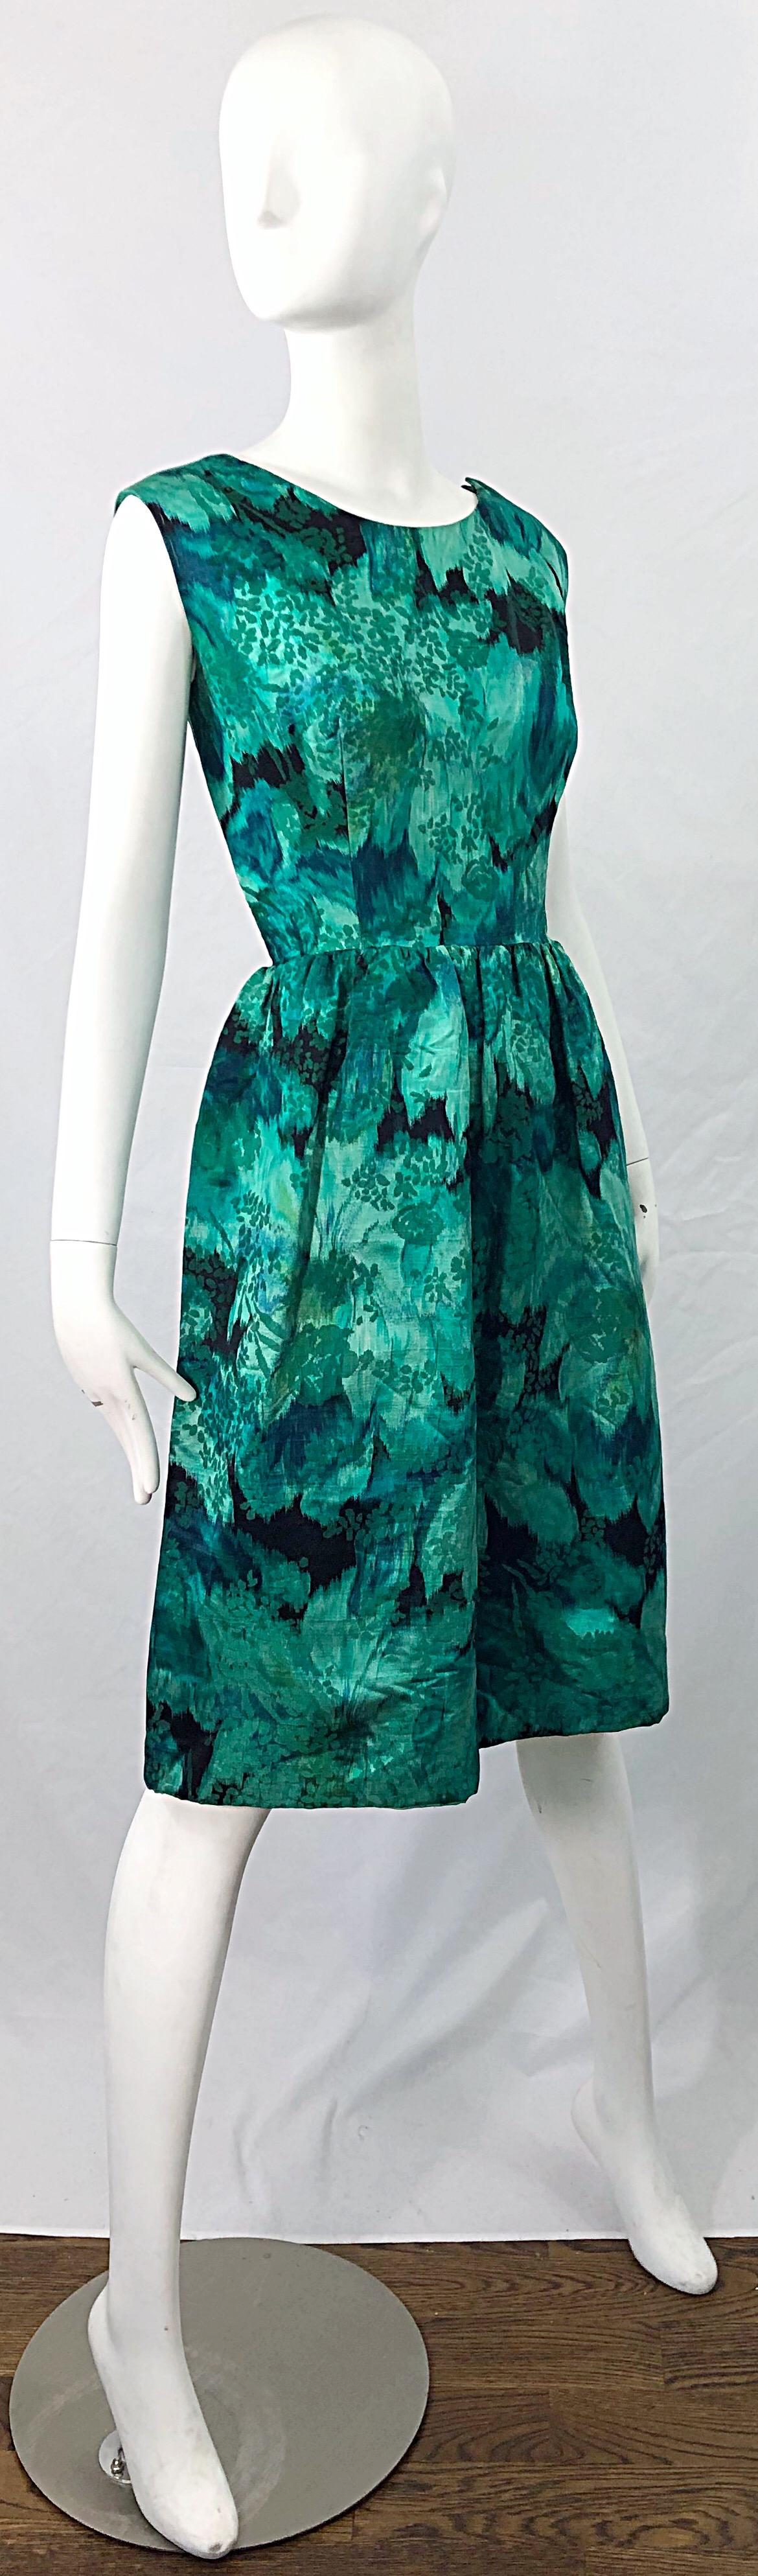 1950s Demi Couture Green Botanical Floral Silk Fit n' Flare Vintage 50s Dress In Excellent Condition For Sale In San Diego, CA